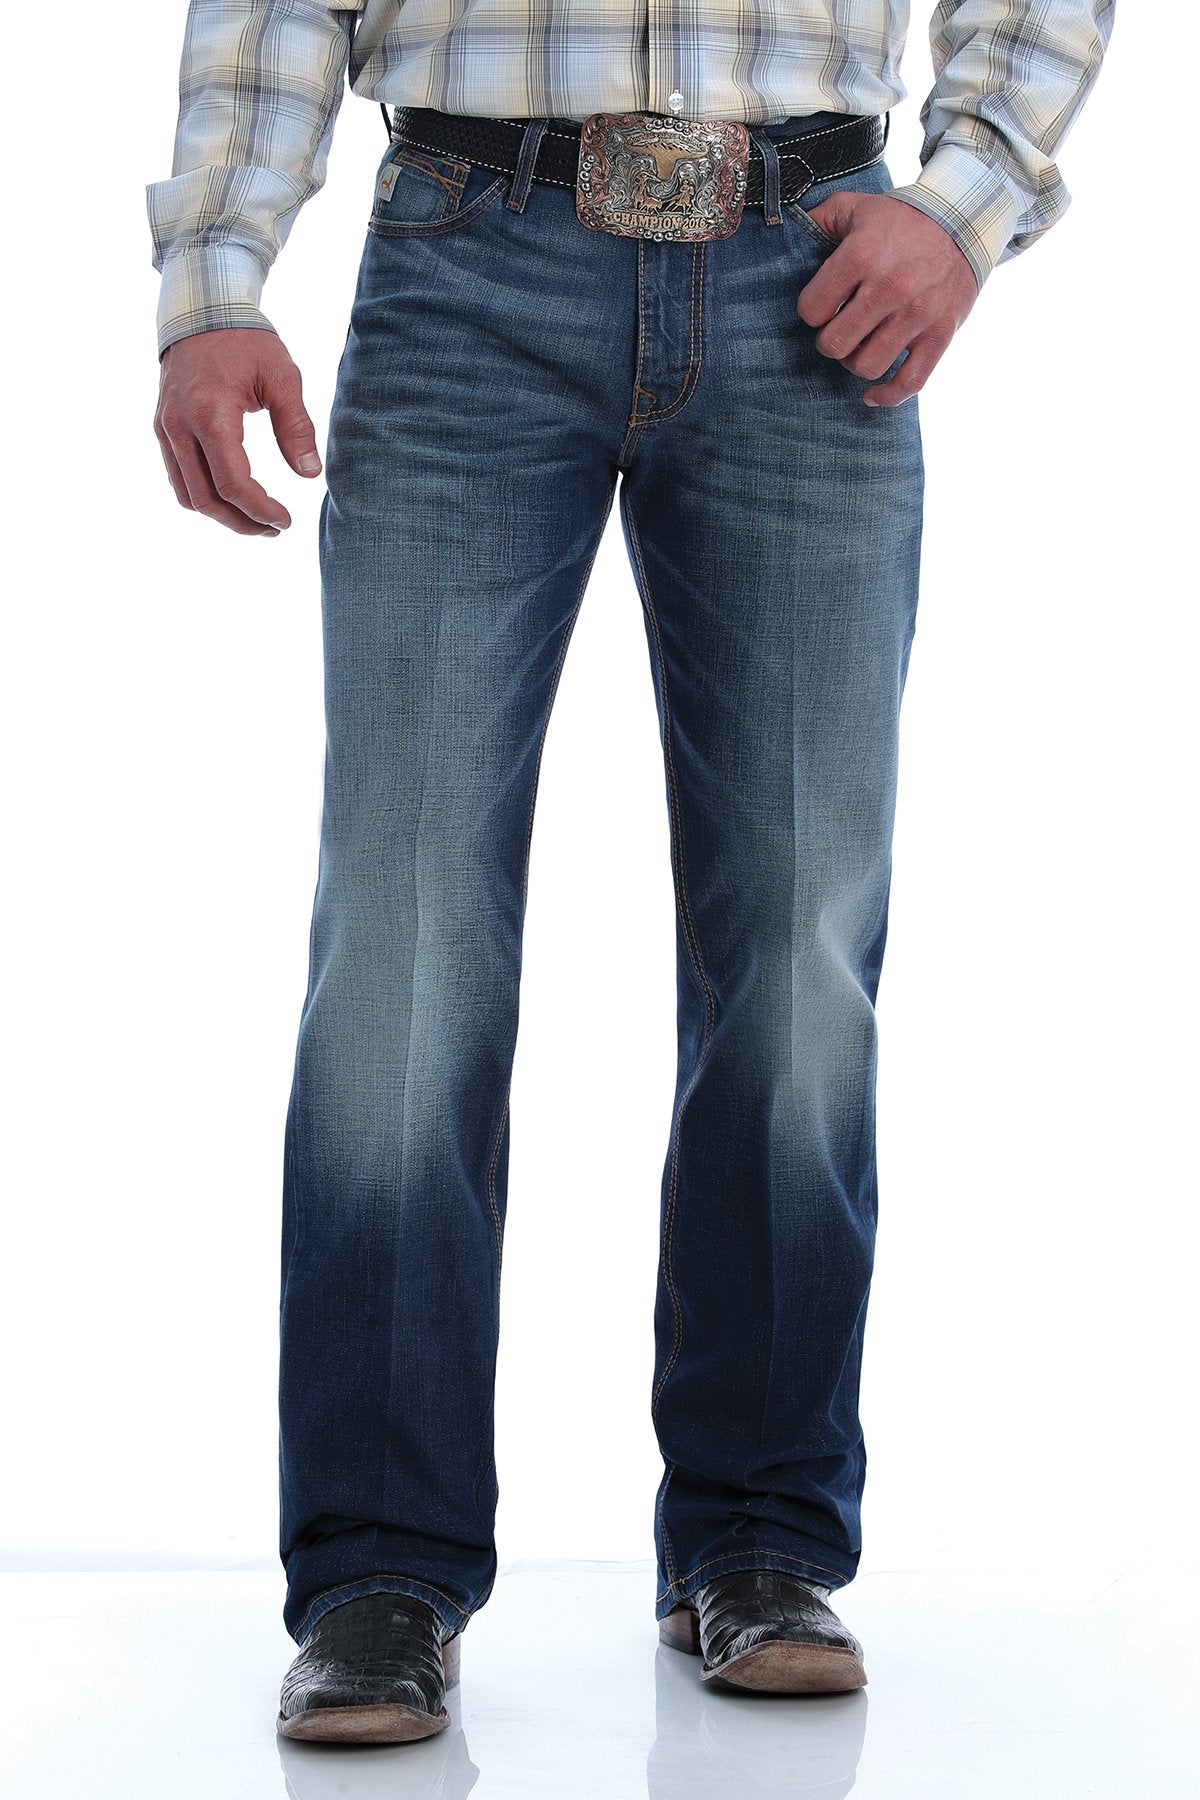 Cinch Mens Relaxed Fit Grant Medium Stonewash Jeans - MB51637001